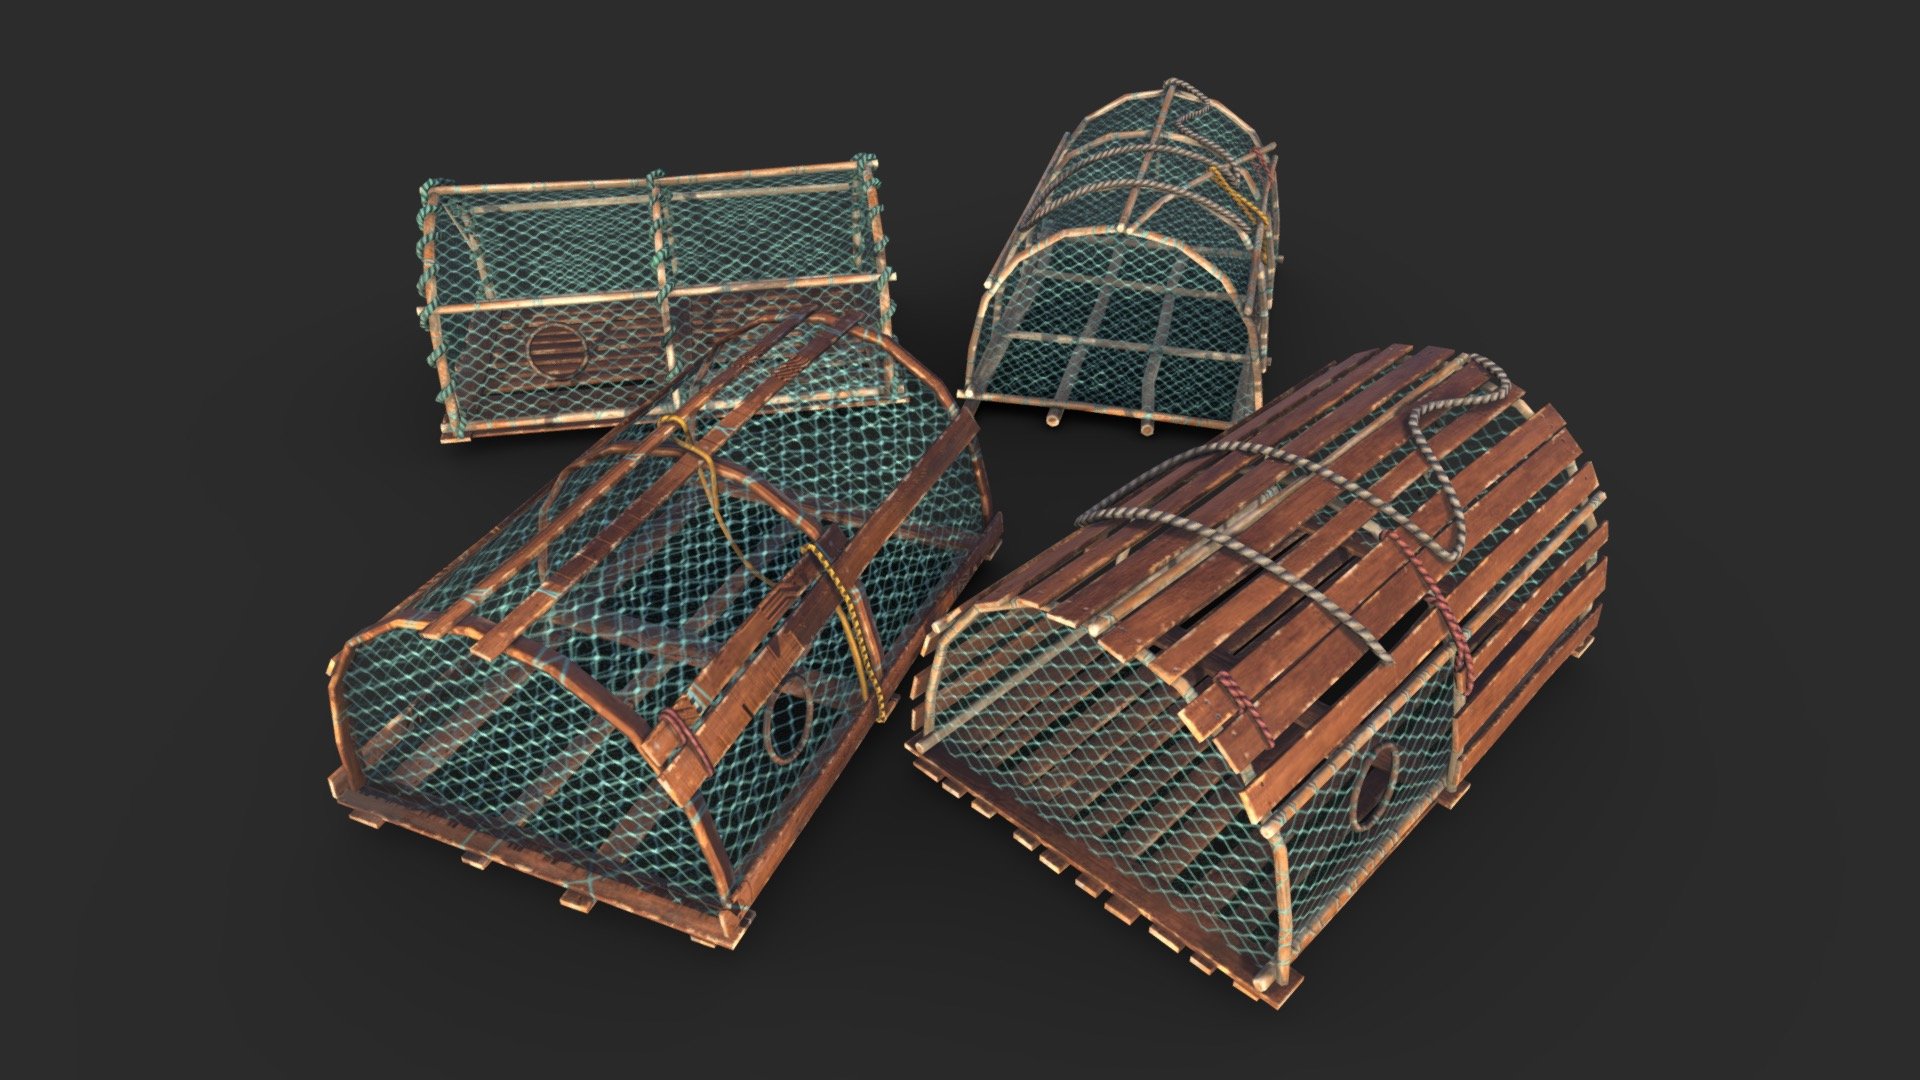 This Wooden Crab Traps Collection includes 4 variants of crap traps and 4 LODs and colliders each to be ready for game. 

The asset is available in realistic style and can be used in any game (post-apo, first person shooter, GTA like, historical… ). All objects share a unique material for the best optimization for games. 

This AAA game model of fishing tool will embellish you scene and add more details which can help the gameplay and the game-design or level-design. 

Low-poly model &amp; Blender native 3.4

SPECIFICATIONS




Objects : 4

Polygons : 1290

Subdivision ready : No

Render engine : Eevee (Cycles ready)

GAME SPECS




LODs : Yes (inside FBX for Unity &amp; Unreal)

Numbers of LODs : 4

Collider : Yes

EXPORTED FORMATS

FBX
Collada
OBJ

TEXTURES




Materials in scene : 4

Textures sizes : 4K

Textures types : Base Color, Metallic, Roughness, Normal (DirectX &amp; OpenGL), Heigh, AO (also Unity &amp; Unreal ARM workflow maps)

Textures format : PNG

GENERAL

Real scale : Yes - Crab Traps Collection - Buy Royalty Free 3D model by KangaroOz 3D (@KangaroOz-3D) 3d model